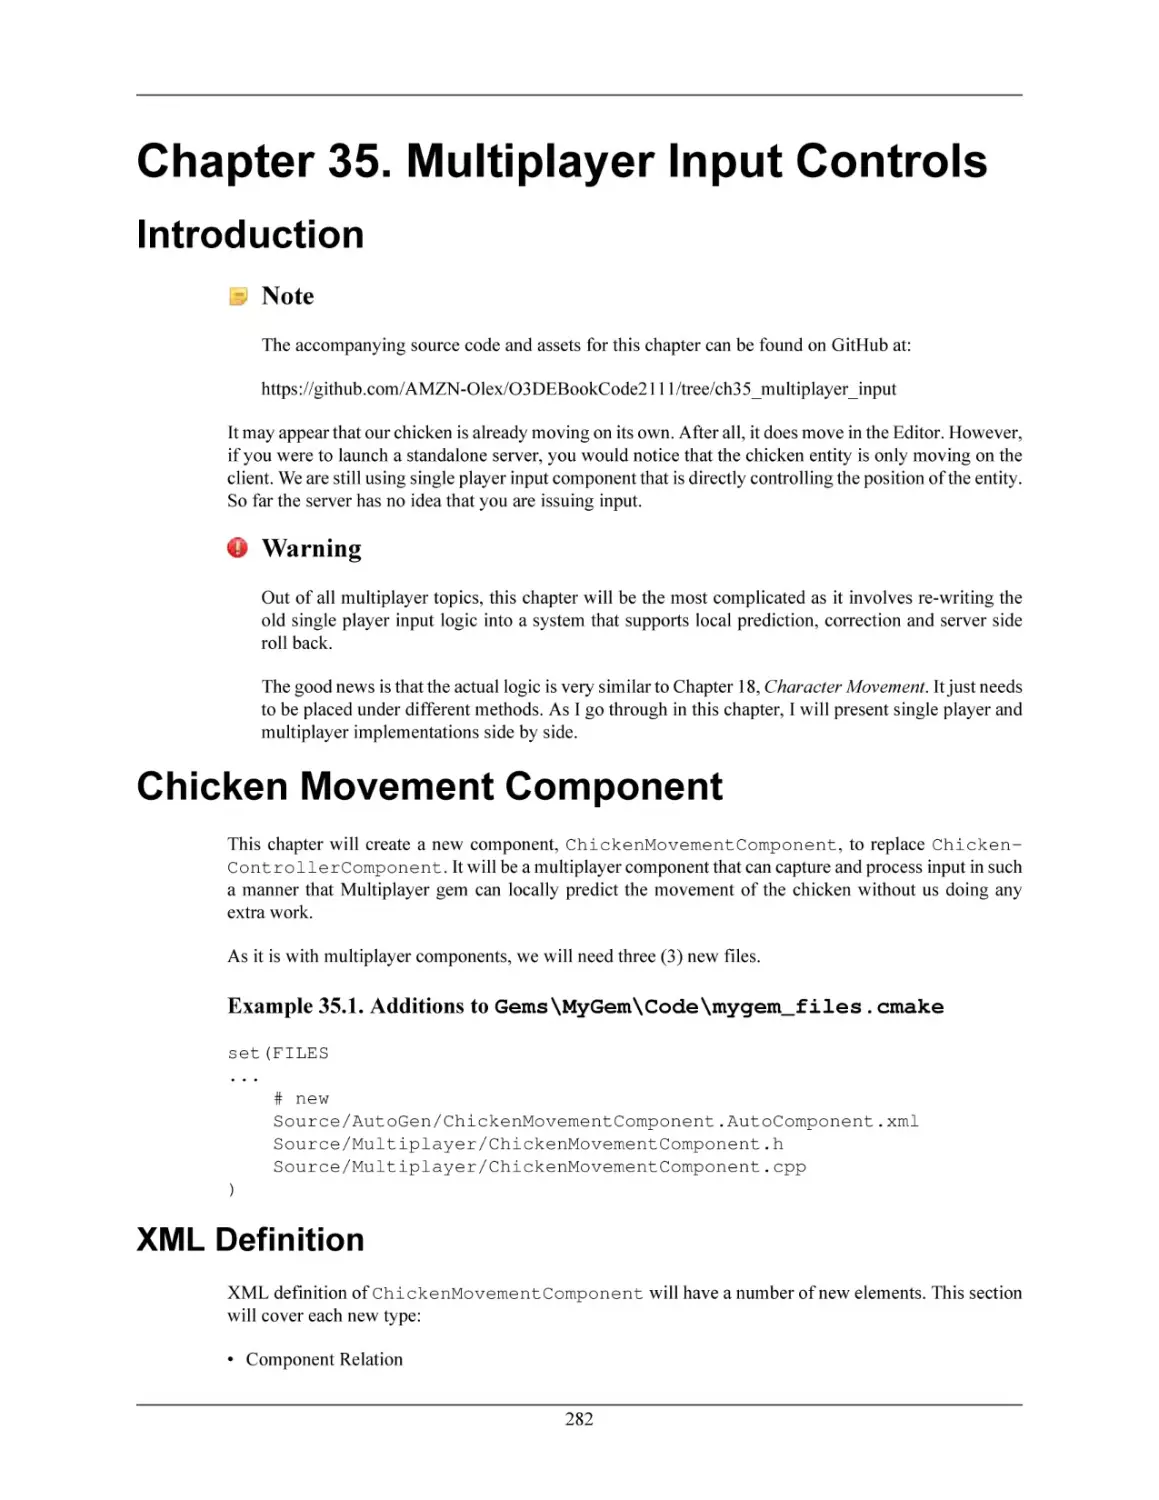 Chapter 35. Multiplayer Input Controls
Introduction
Chicken Movement Component
XML Definition